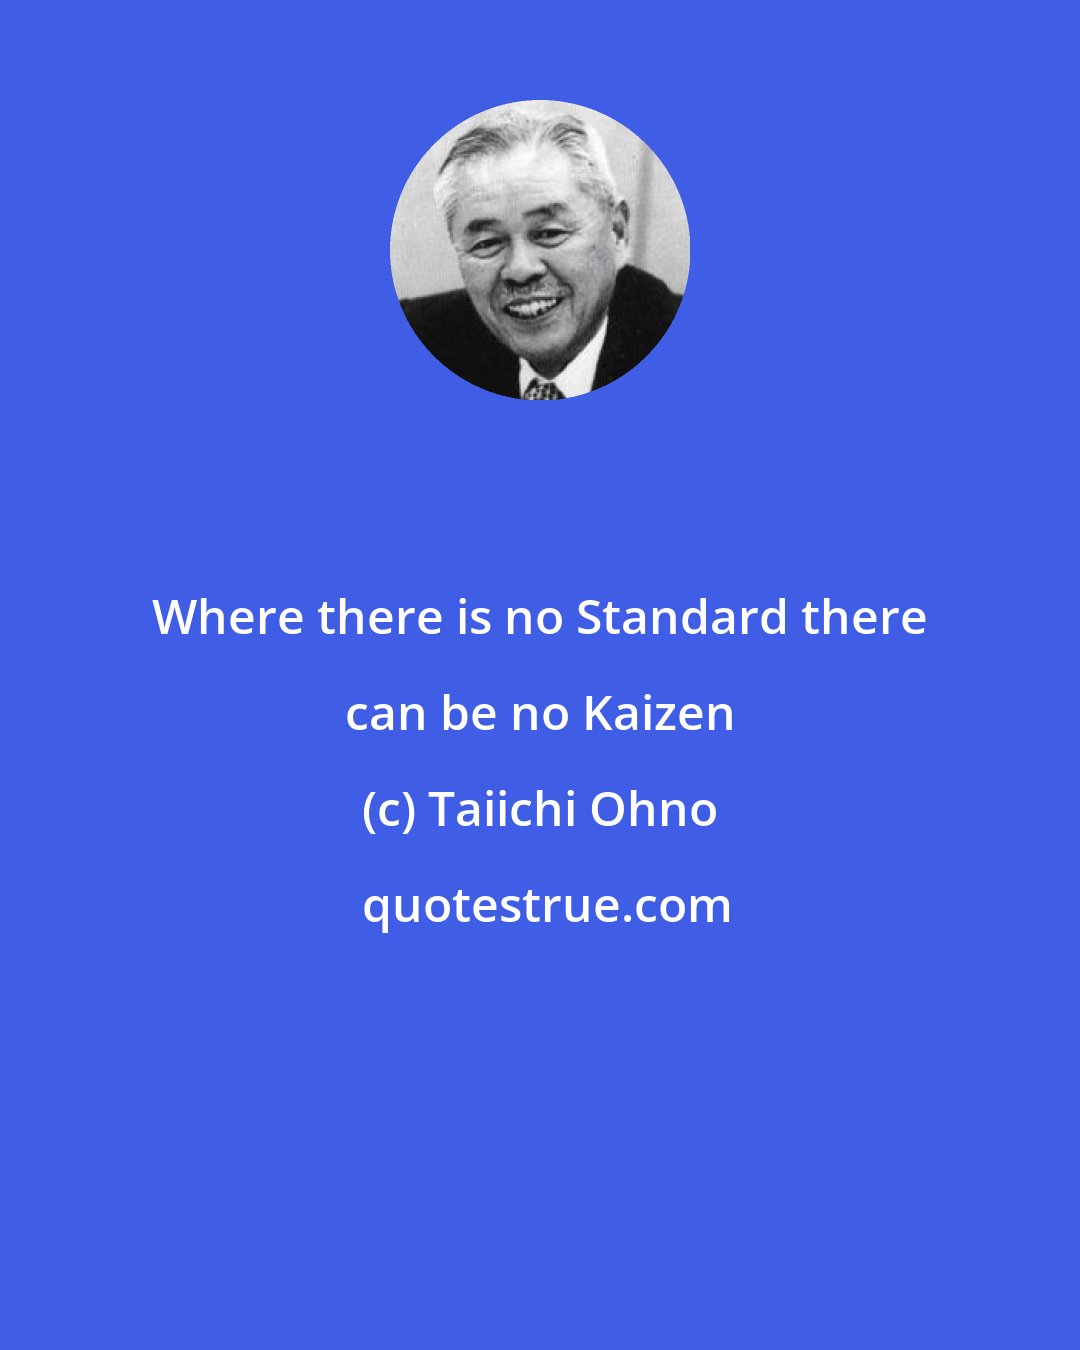 Taiichi Ohno: Where there is no Standard there can be no Kaizen